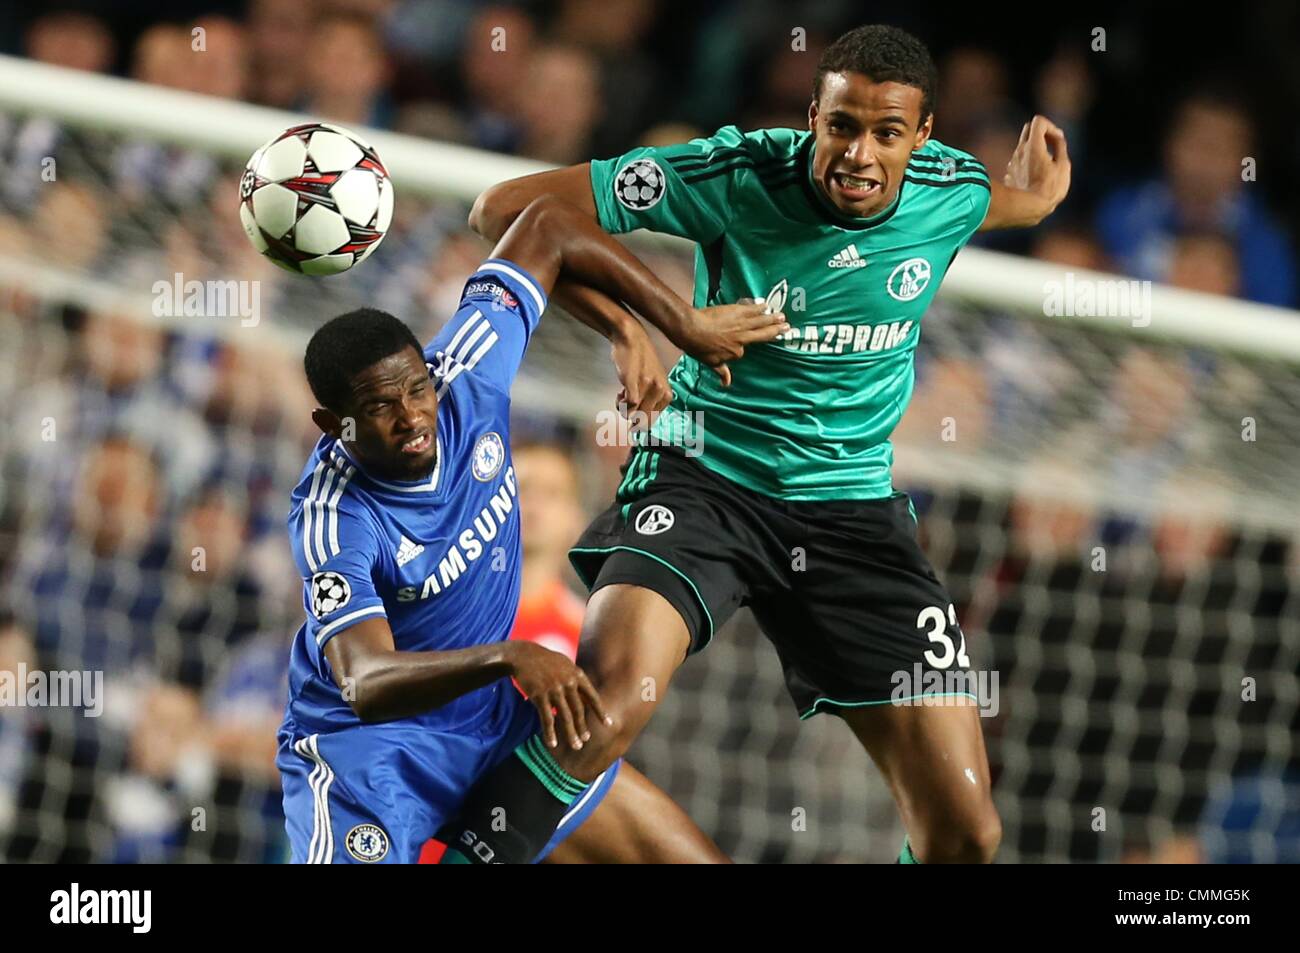 London, Britain. 06th Nov, 2013. Schalke's Joel Matip (R) and Samuel Eto'o (L) of Chelsea vie for the ball during the UEFA Champions League group E soccer match between Chelsea FC and FC Schalke 04 at Stamford Bridge Stadium in London, Britain, 06 November 2013. Photo: Friso Gentsch/dpa/Alamy Live News Stock Photo